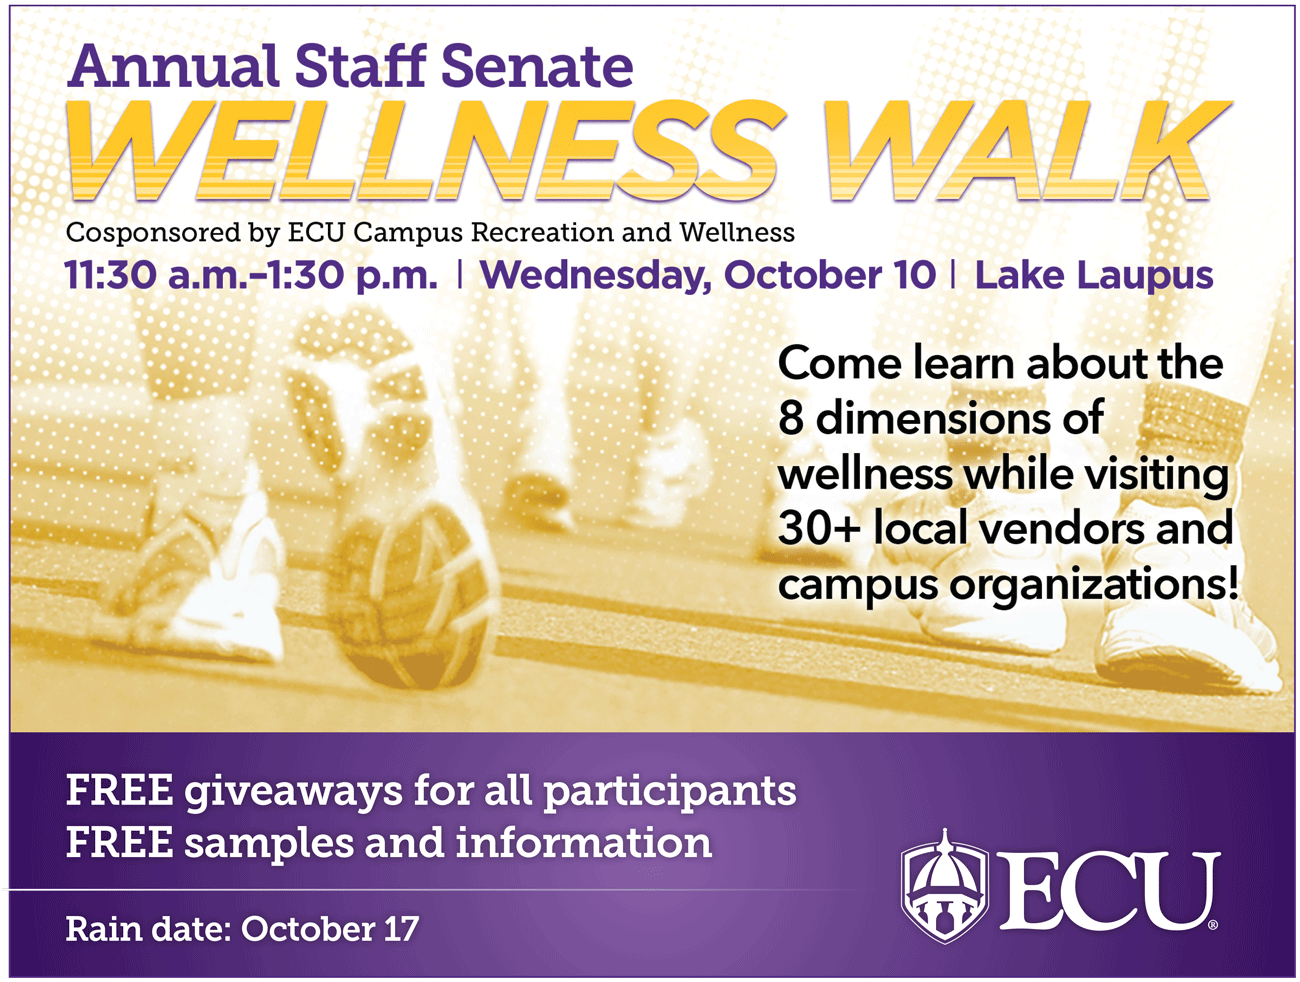 Annual Staff Senate Wellness Walk. Cosponsored by ECU Campus Recreation and Wellness. 11:30 a.m to 1:30 p.m. Wednesday, October 10 at Lake Laupus. Rain date October 17th.